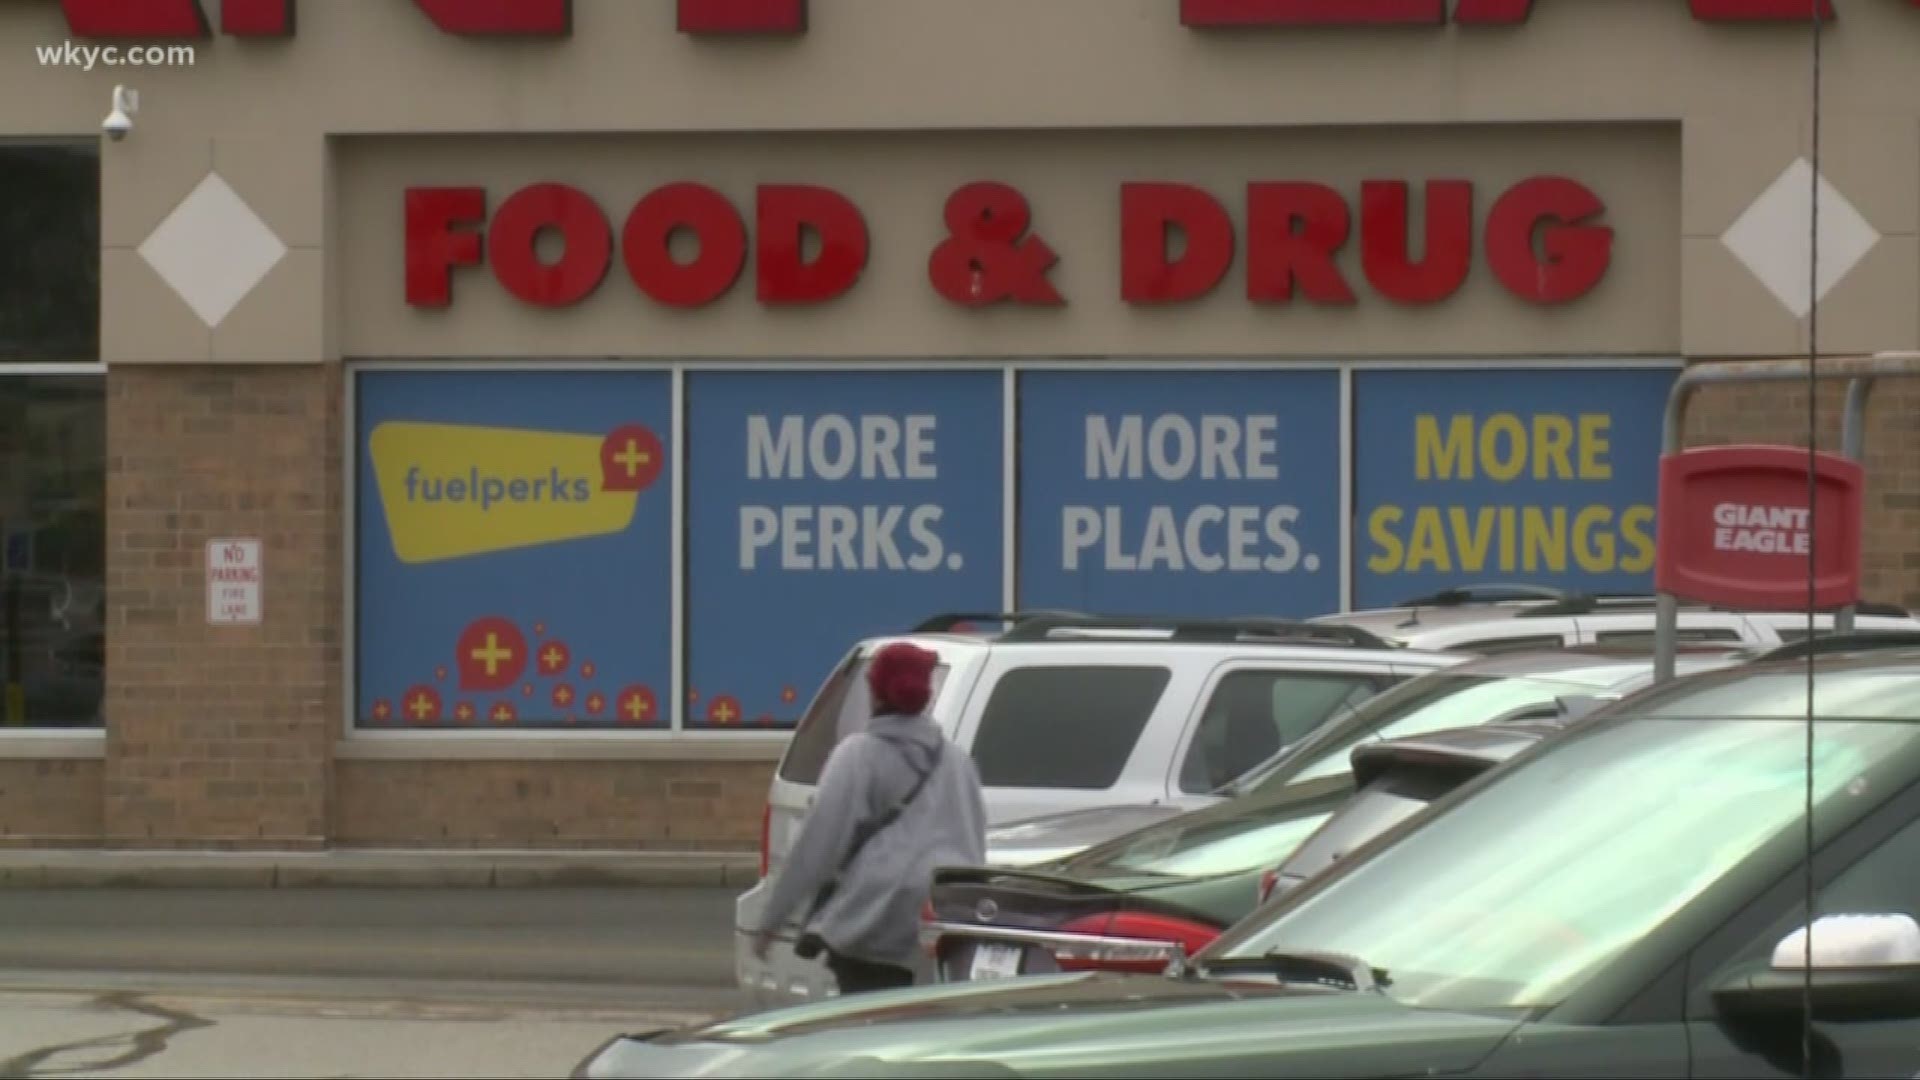 Grocery stores & similar locations are considered essential, but Gov. DeWine still wants them to emphasize social distancing. Dorsena Drakeford reports.